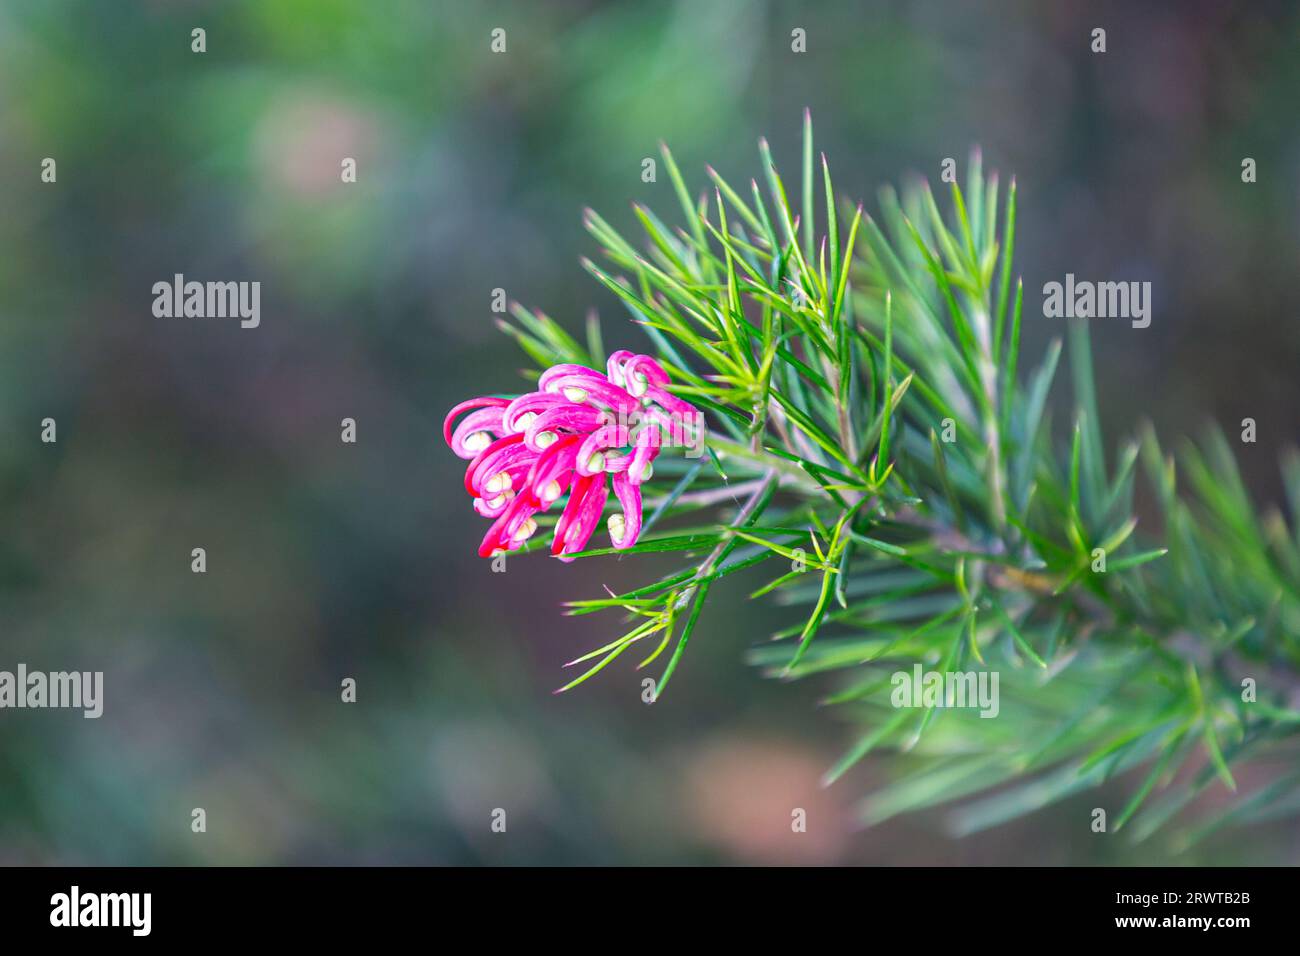 A close up of a juniper leaf plant in bloom Stock Photo